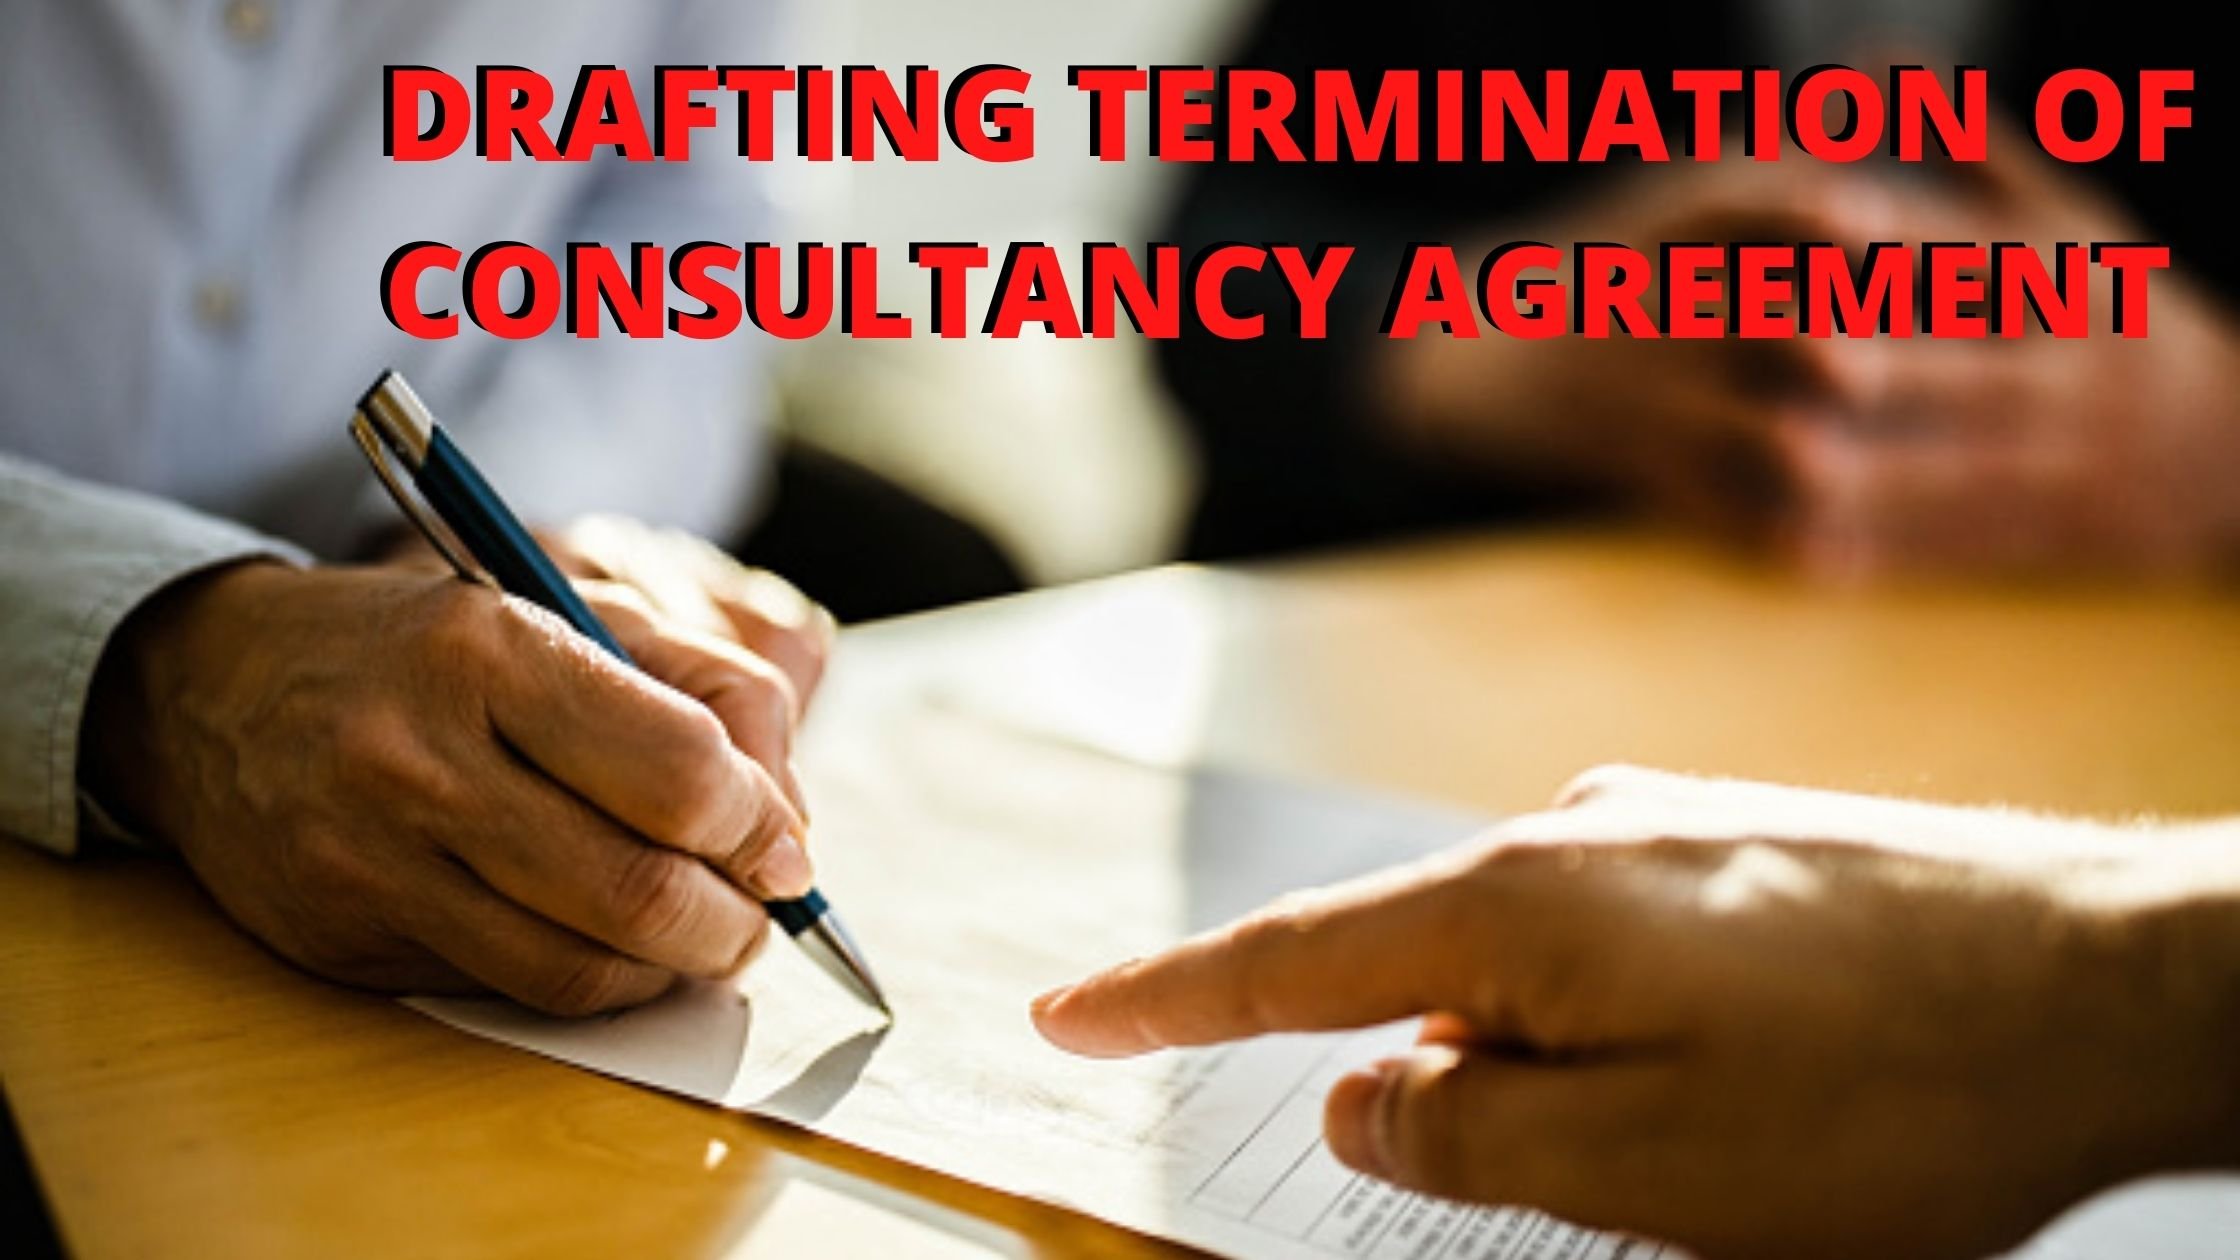 DRAFTING A LETTER FOR TERMINATION OF CONSULTANCY AGREEMENT